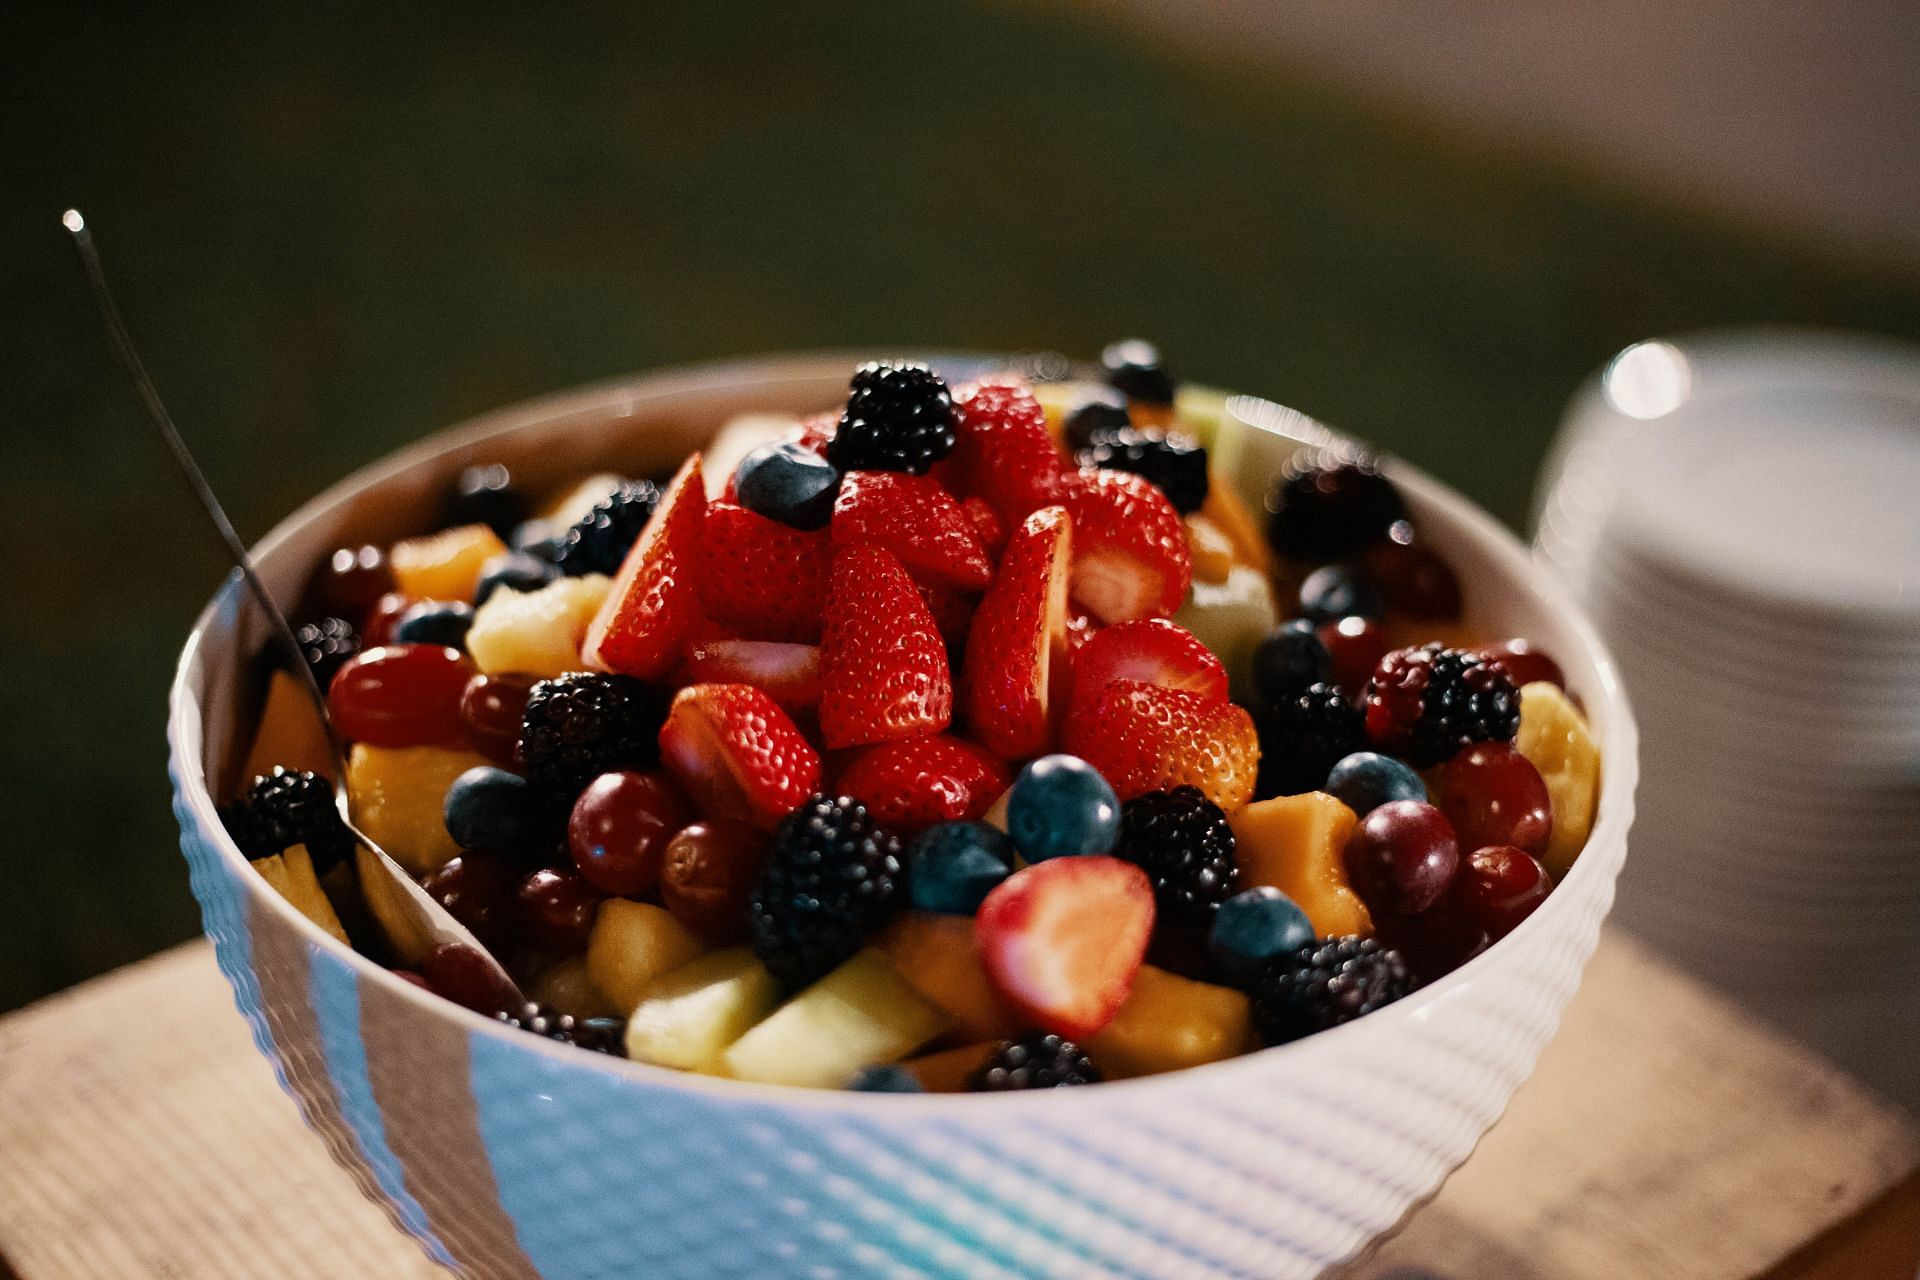 Low-calorie fruit that can add to your salad or breakfast (Image via Pexels/Josh Sorenson)